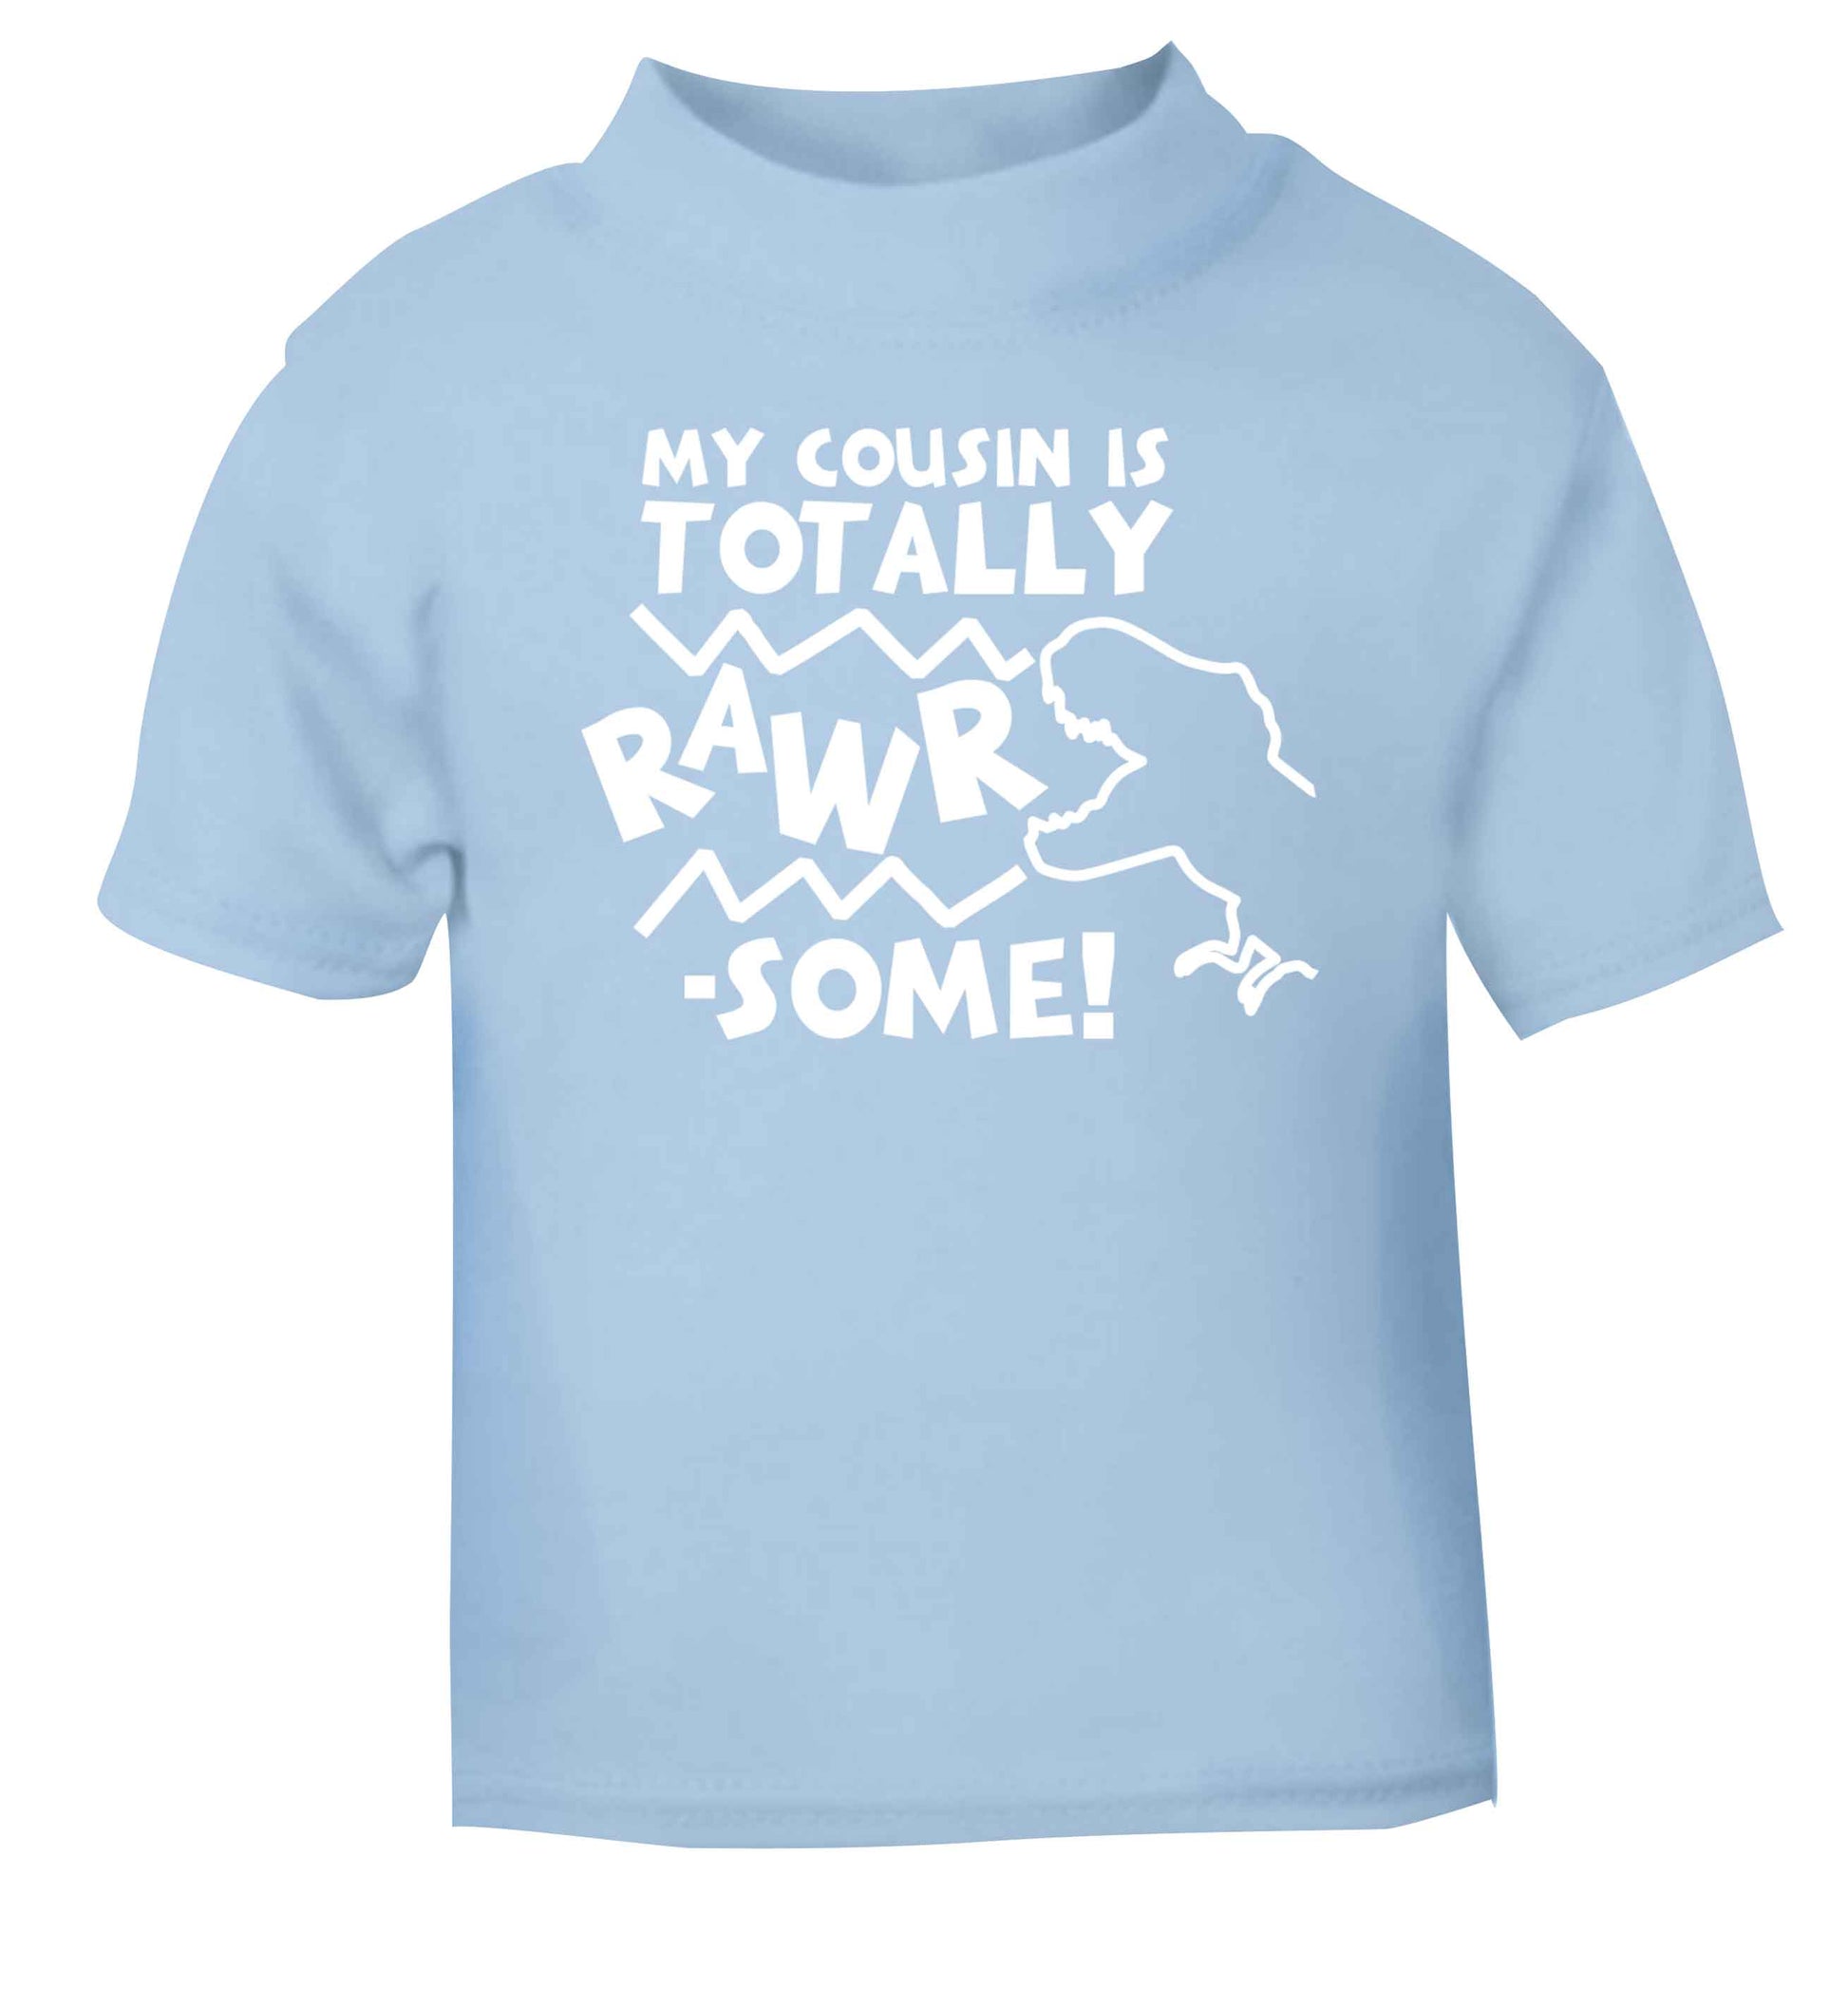 My cousin is totally rawrsome light blue baby toddler Tshirt 2 Years